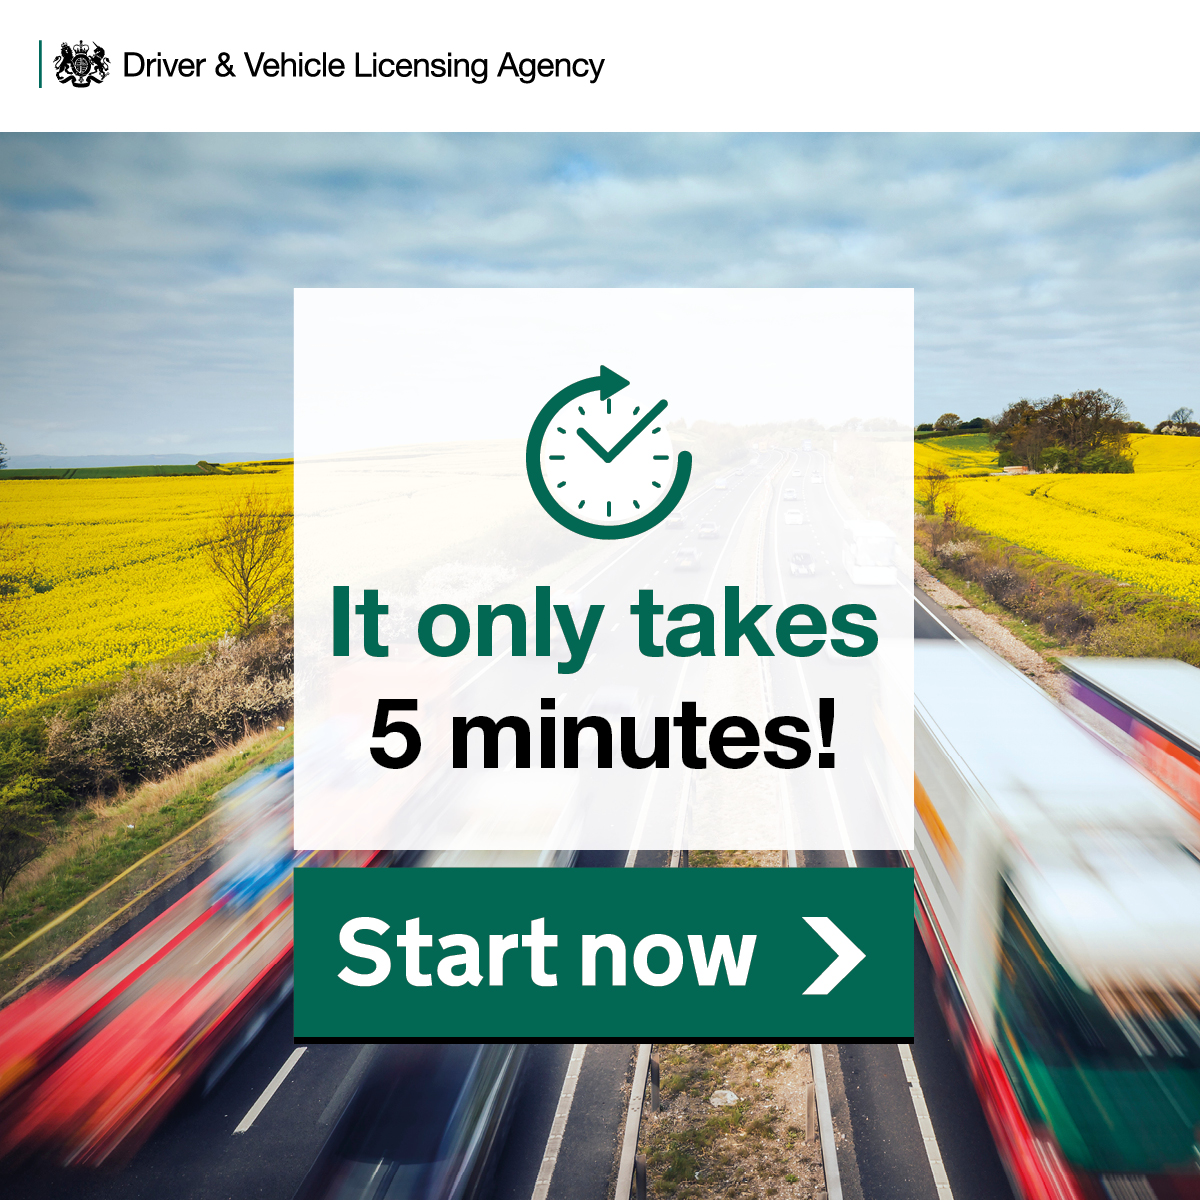 You can now set up an account with us on GOV.UK to view your: • endorsements • penalty points • vehicle tax • MOT status Sign up now, it only takes 5 minutes: gov.uk/dvla/account